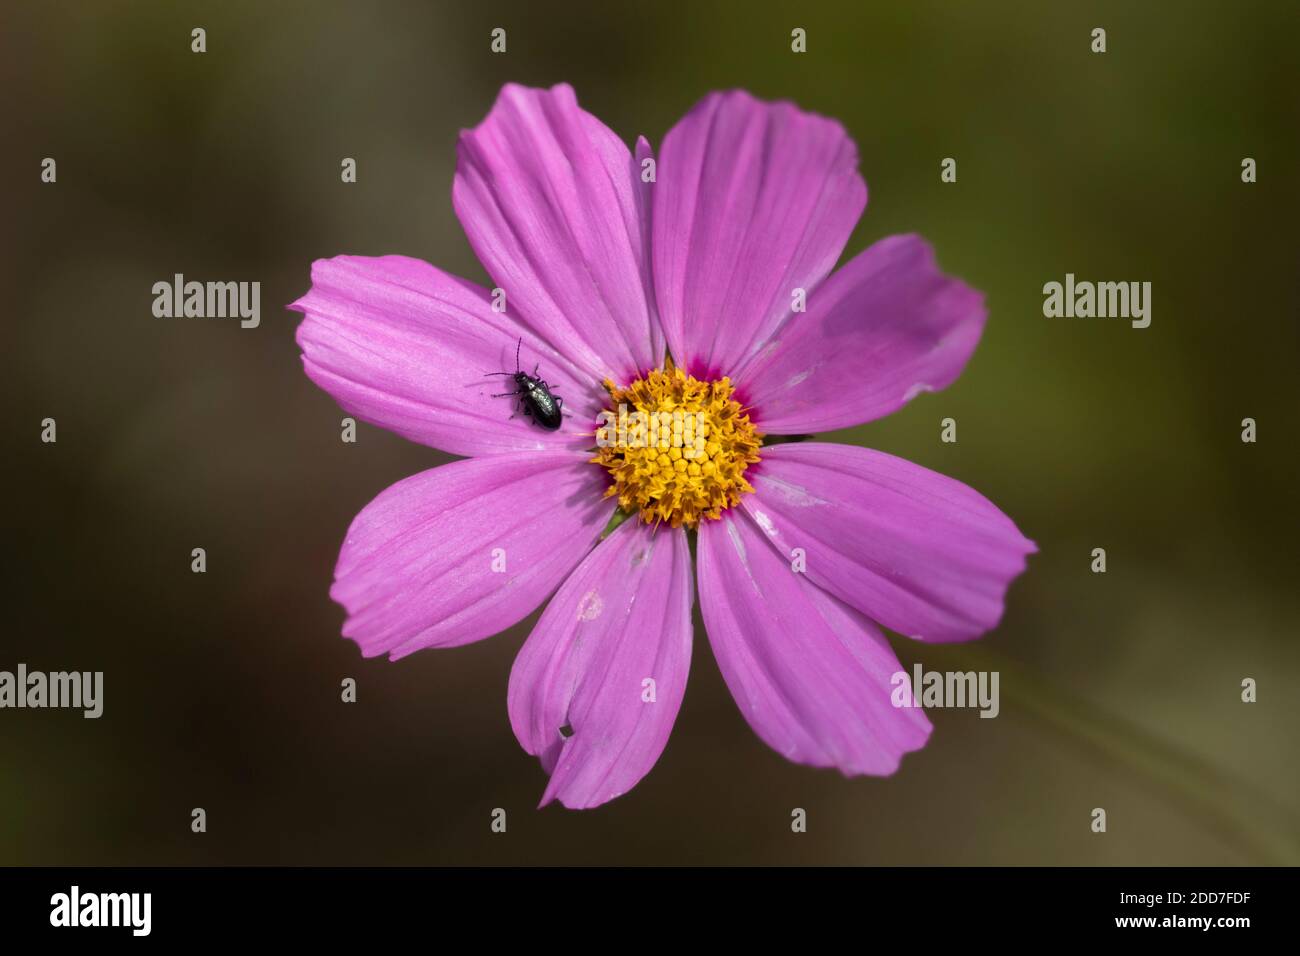 Pink flower and black beetle Stock Photo